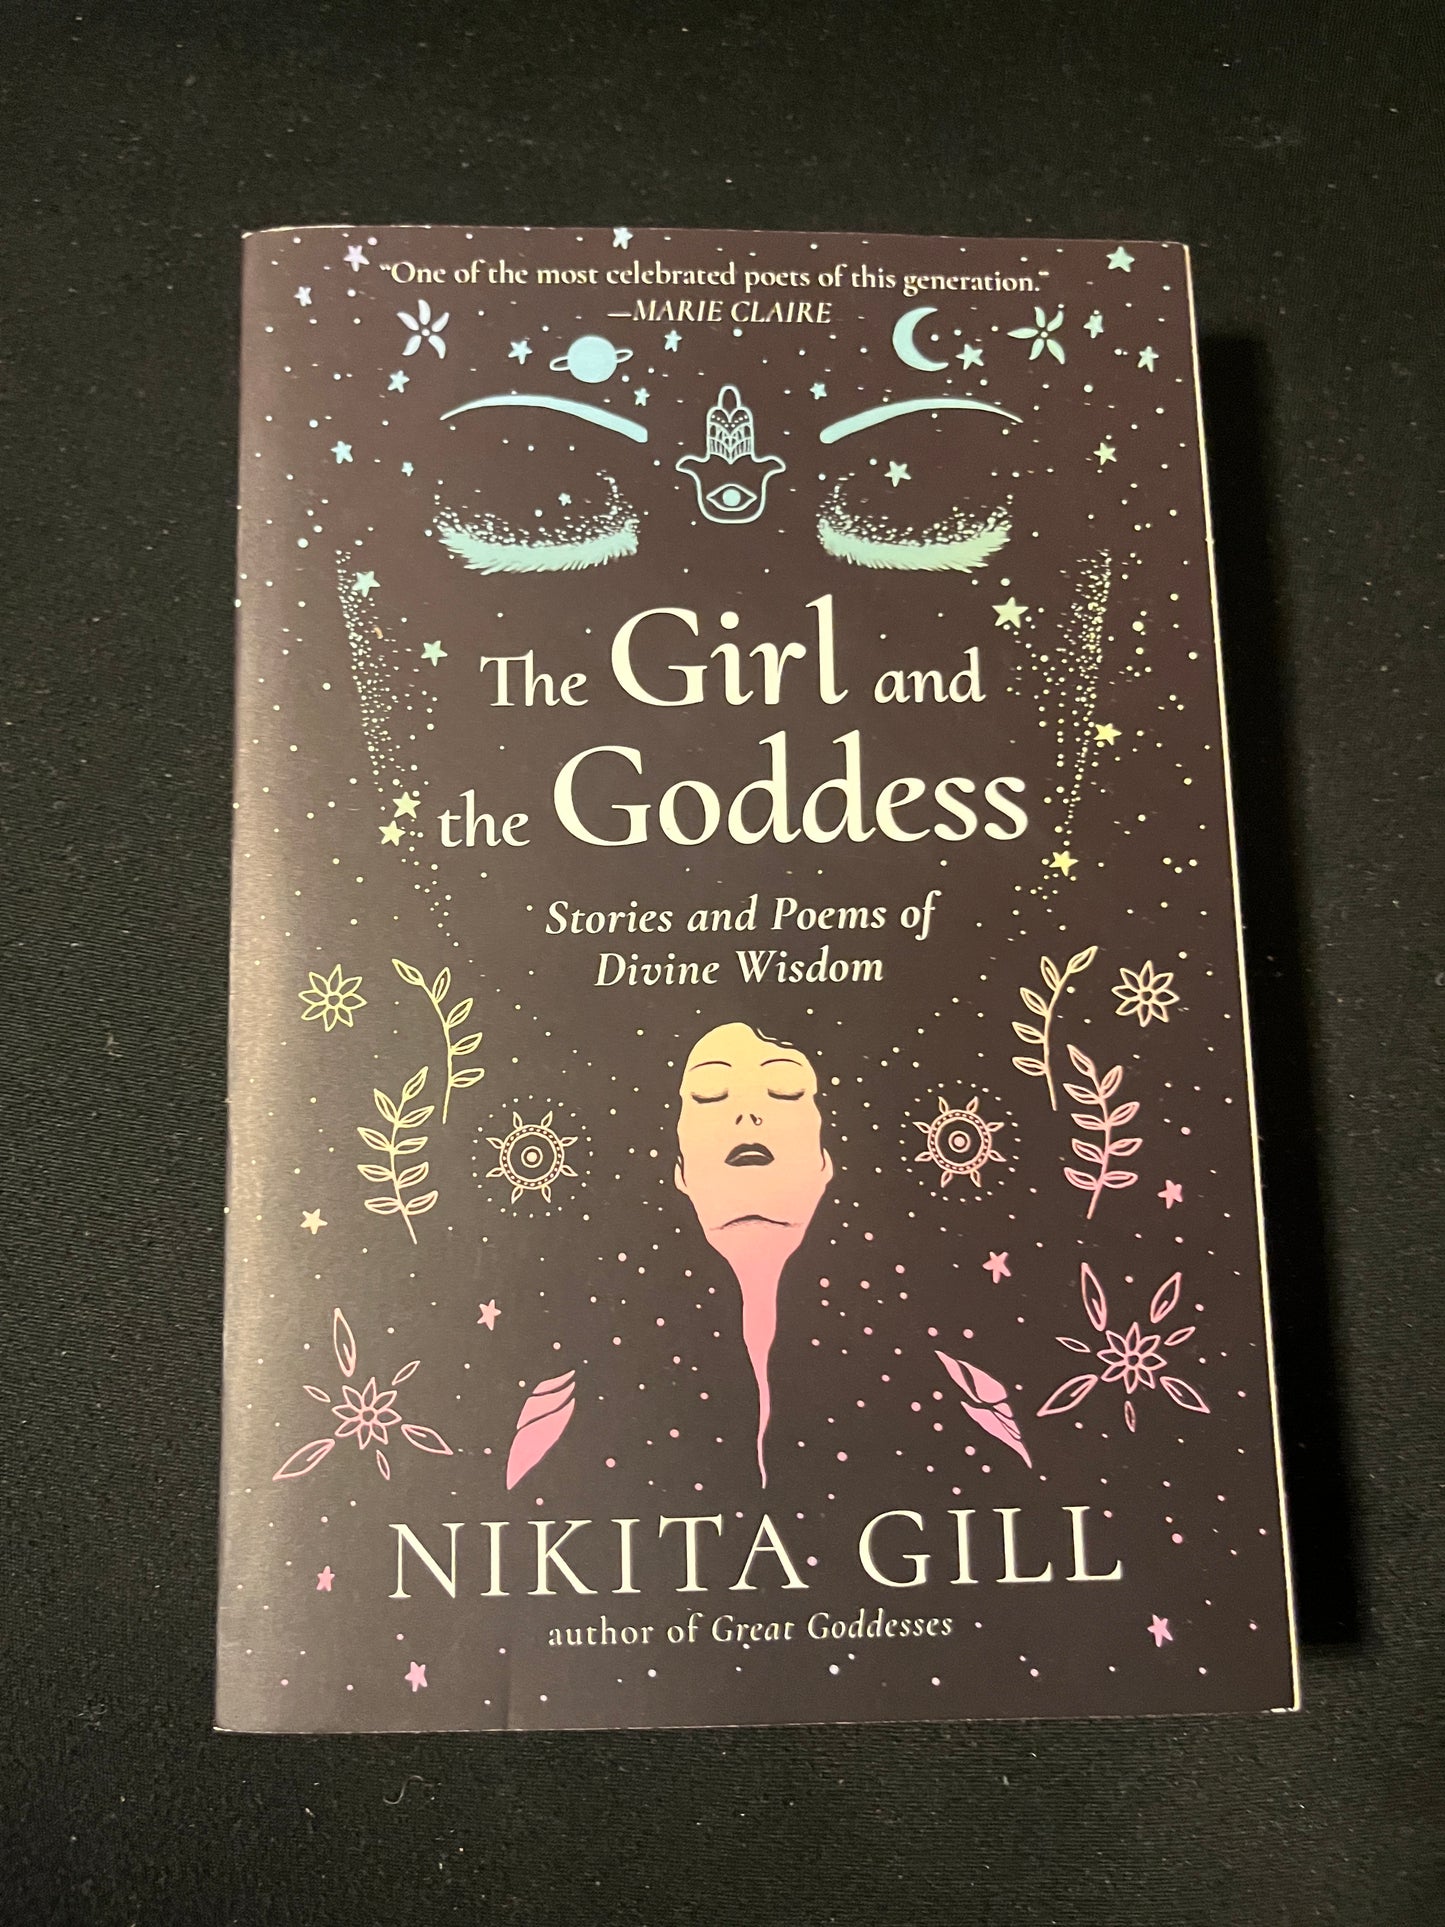 THE GIRL AND THE GODDESS: STORIES AND POEMS OF DIVINE WISDOM by Nikita Gill